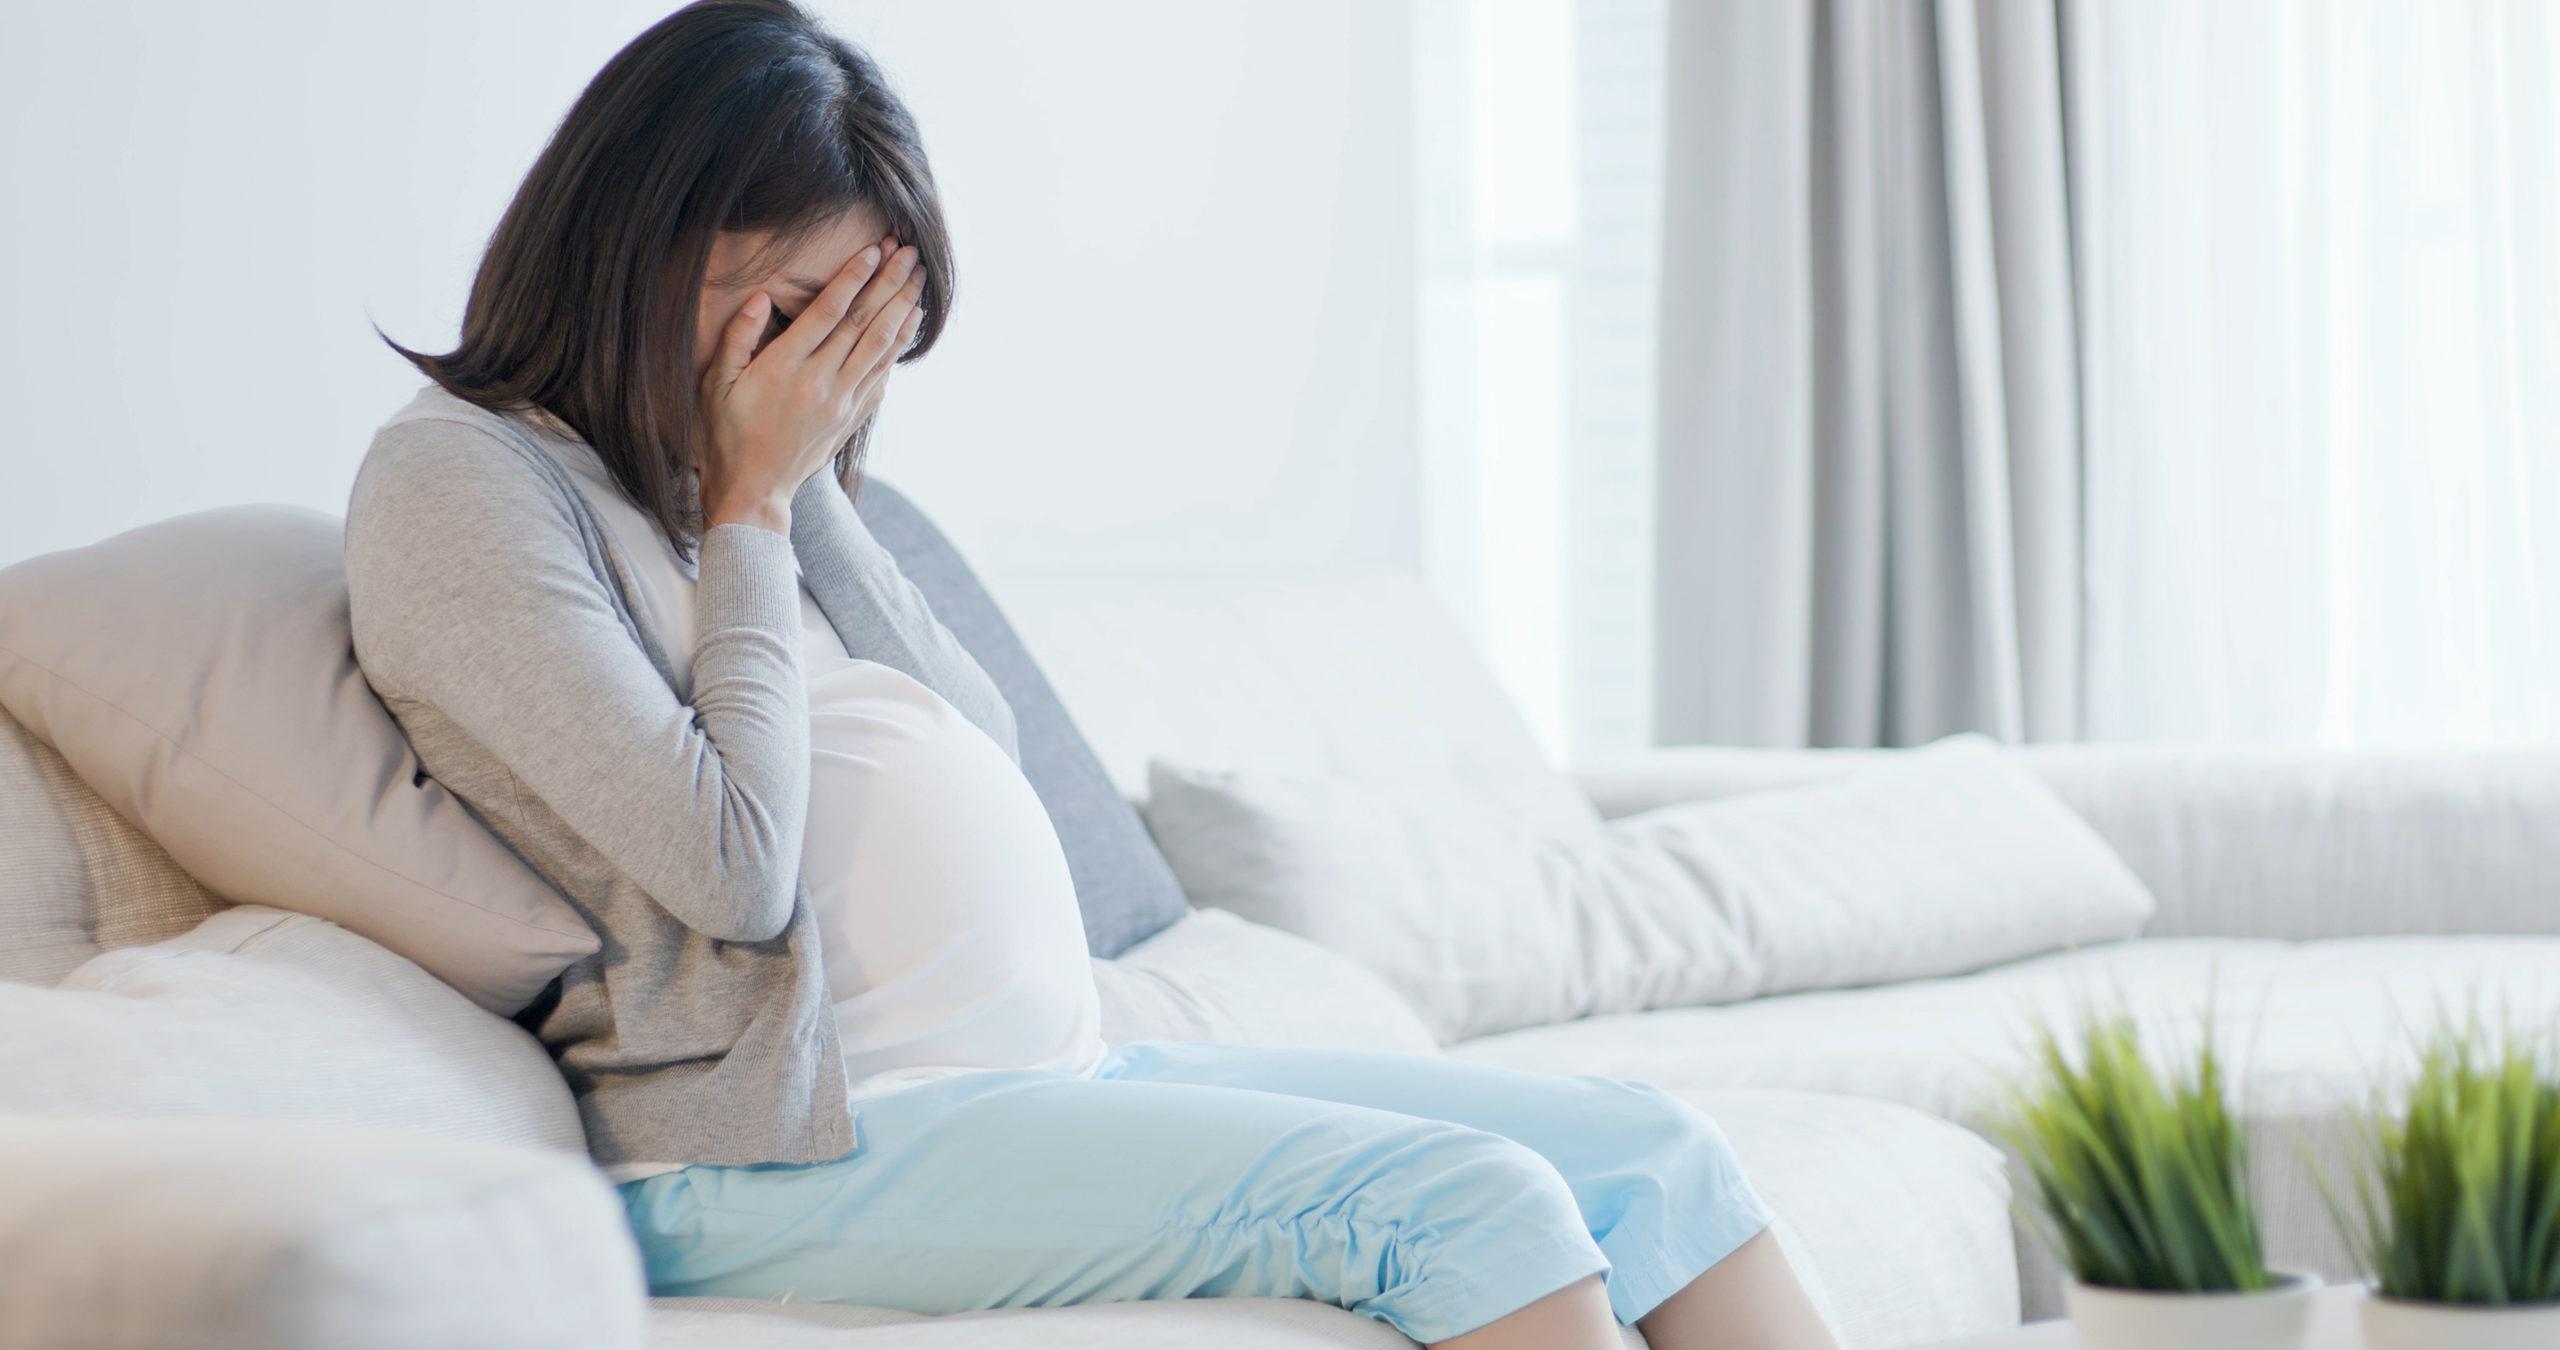 Sad During Pregnancy? It's More Common Than You May Think